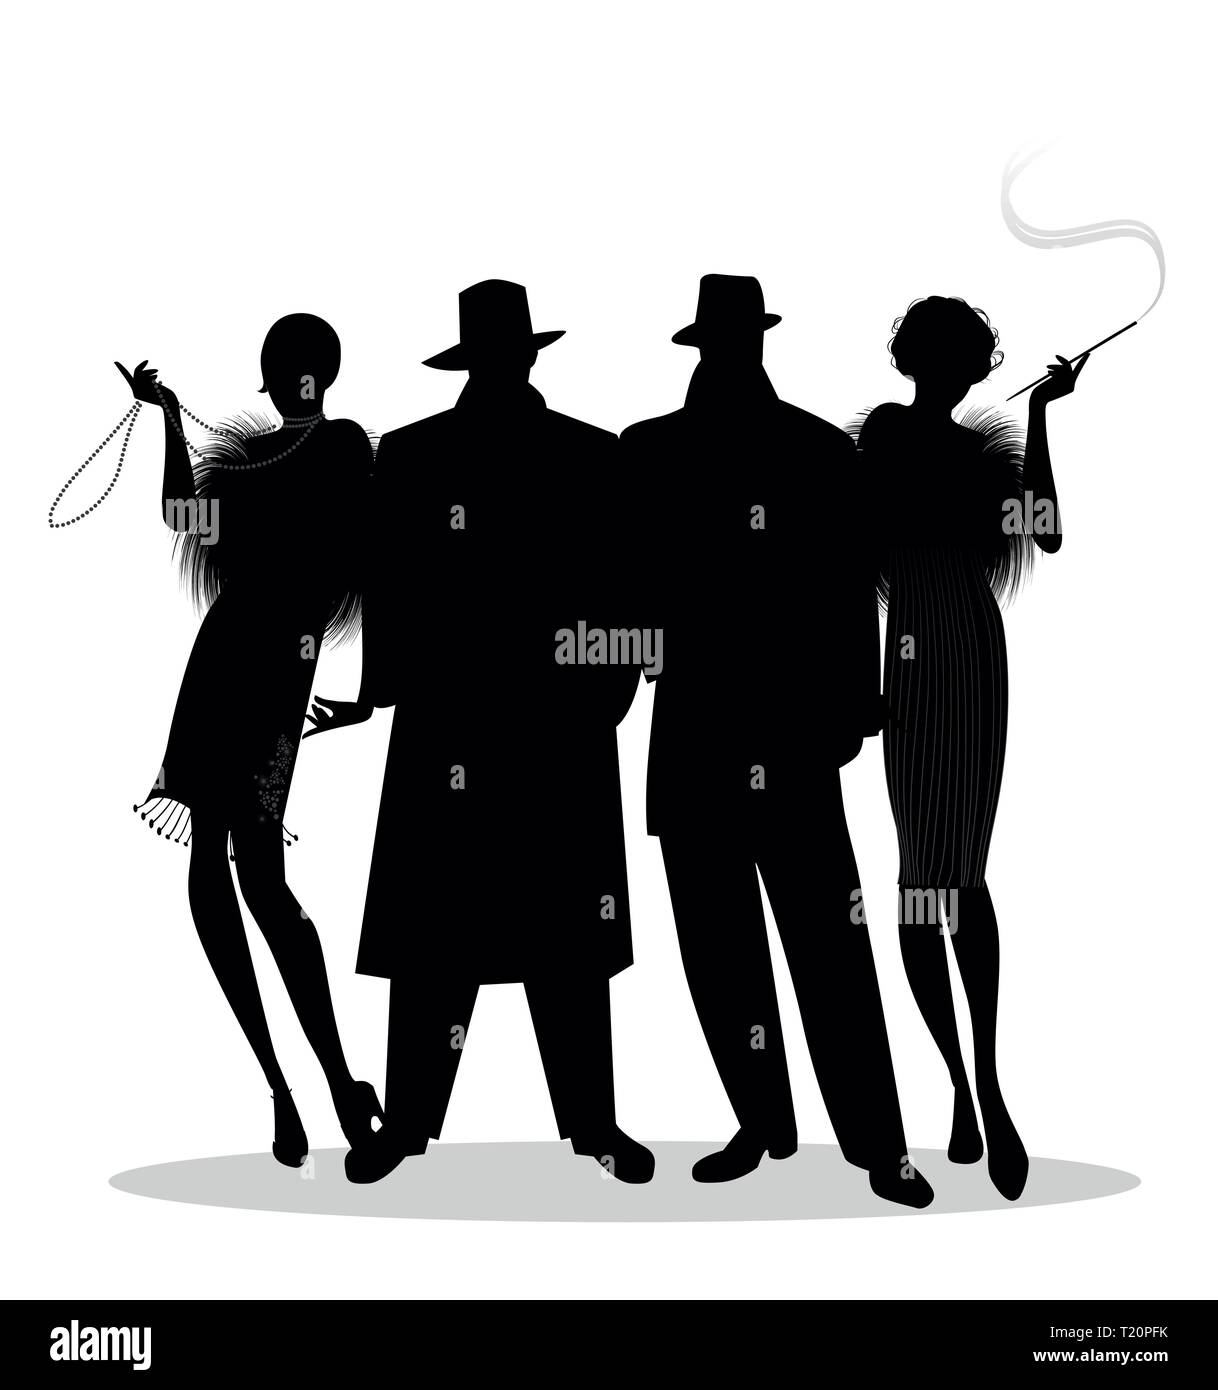 Silhouettes of two men and two flapper girls 20s style isolated on white background. Roaring twenties Stock Vector